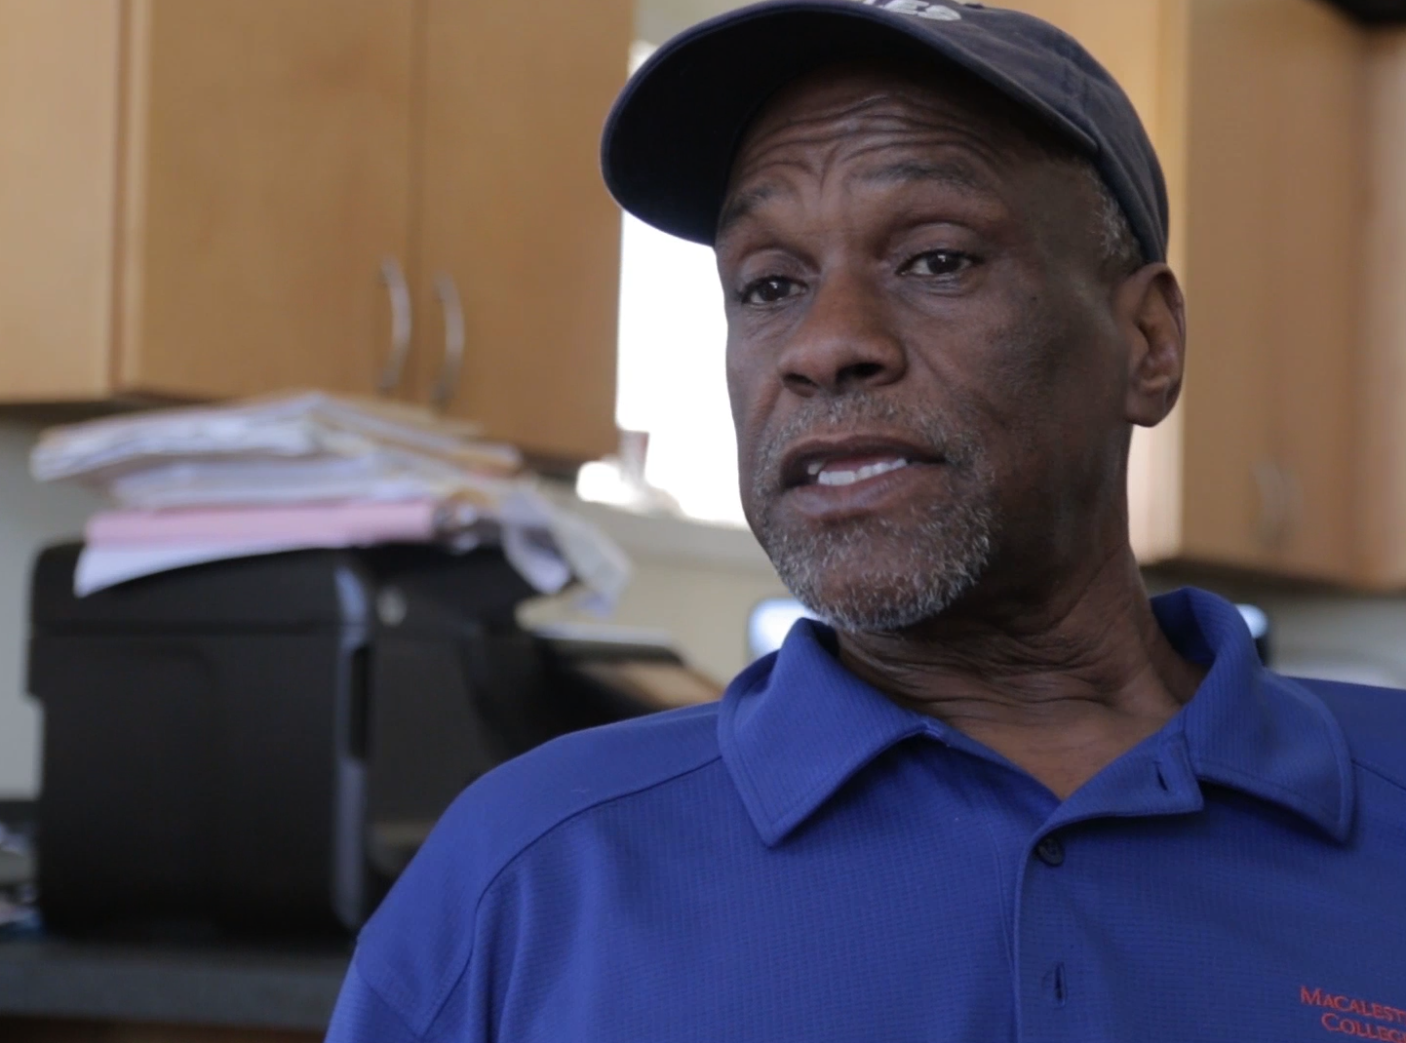 Robert Green lives in a house built by the Make it Right Foundation. His previous home was swept away by flood waters during Hurricane Katrina.